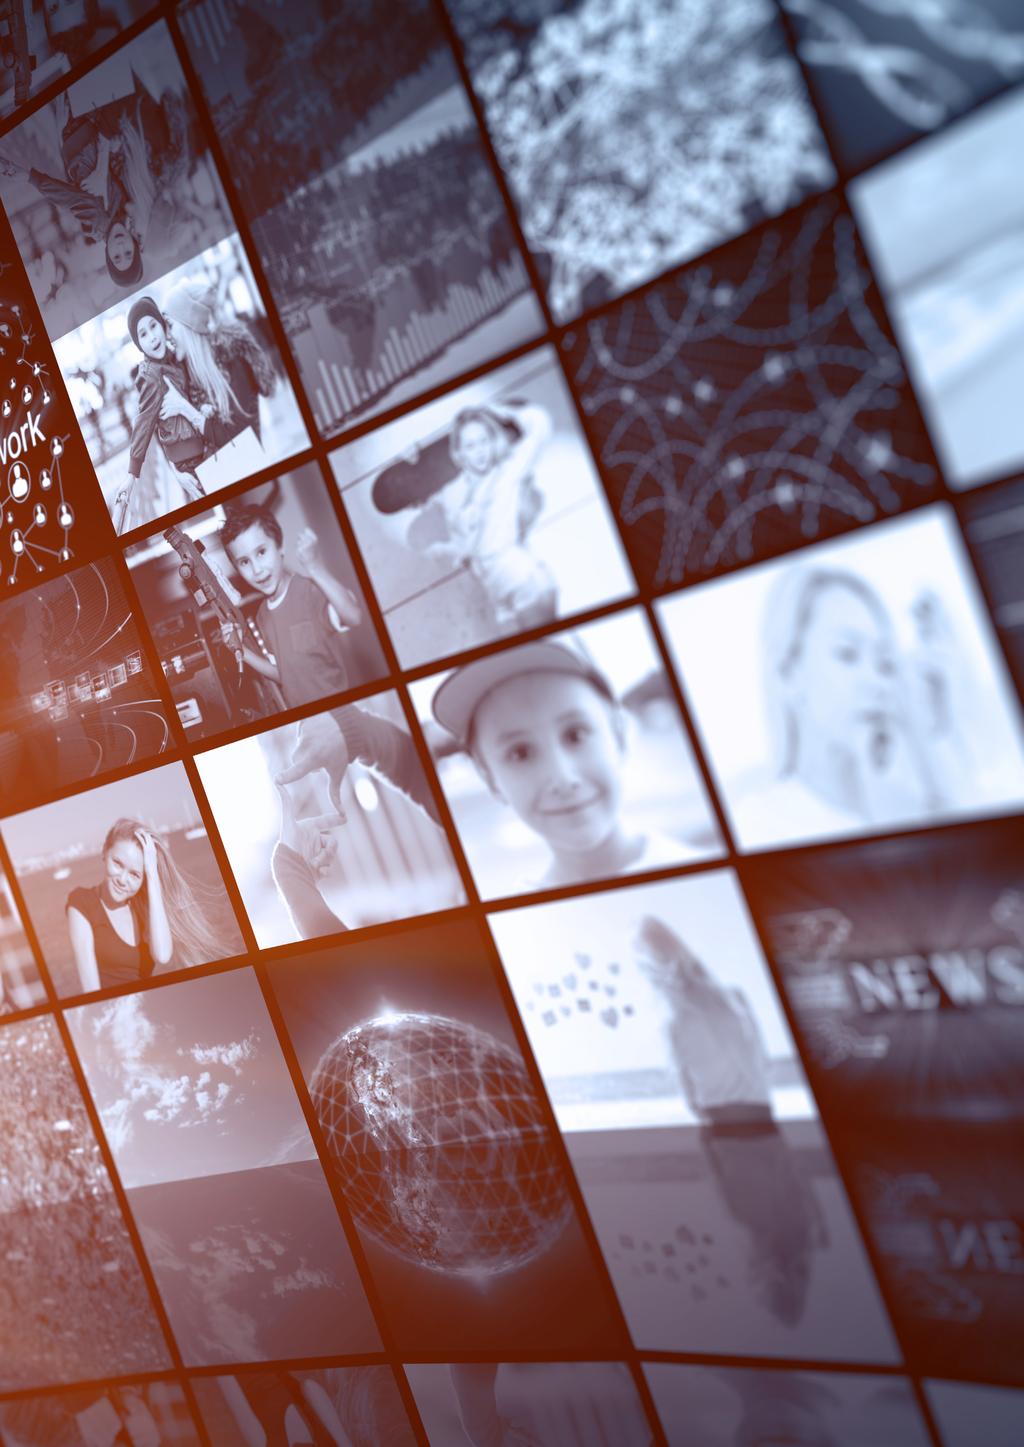 Traditional T V deliver y is no longer enough for broadcasters, customers want access to content ever y where.